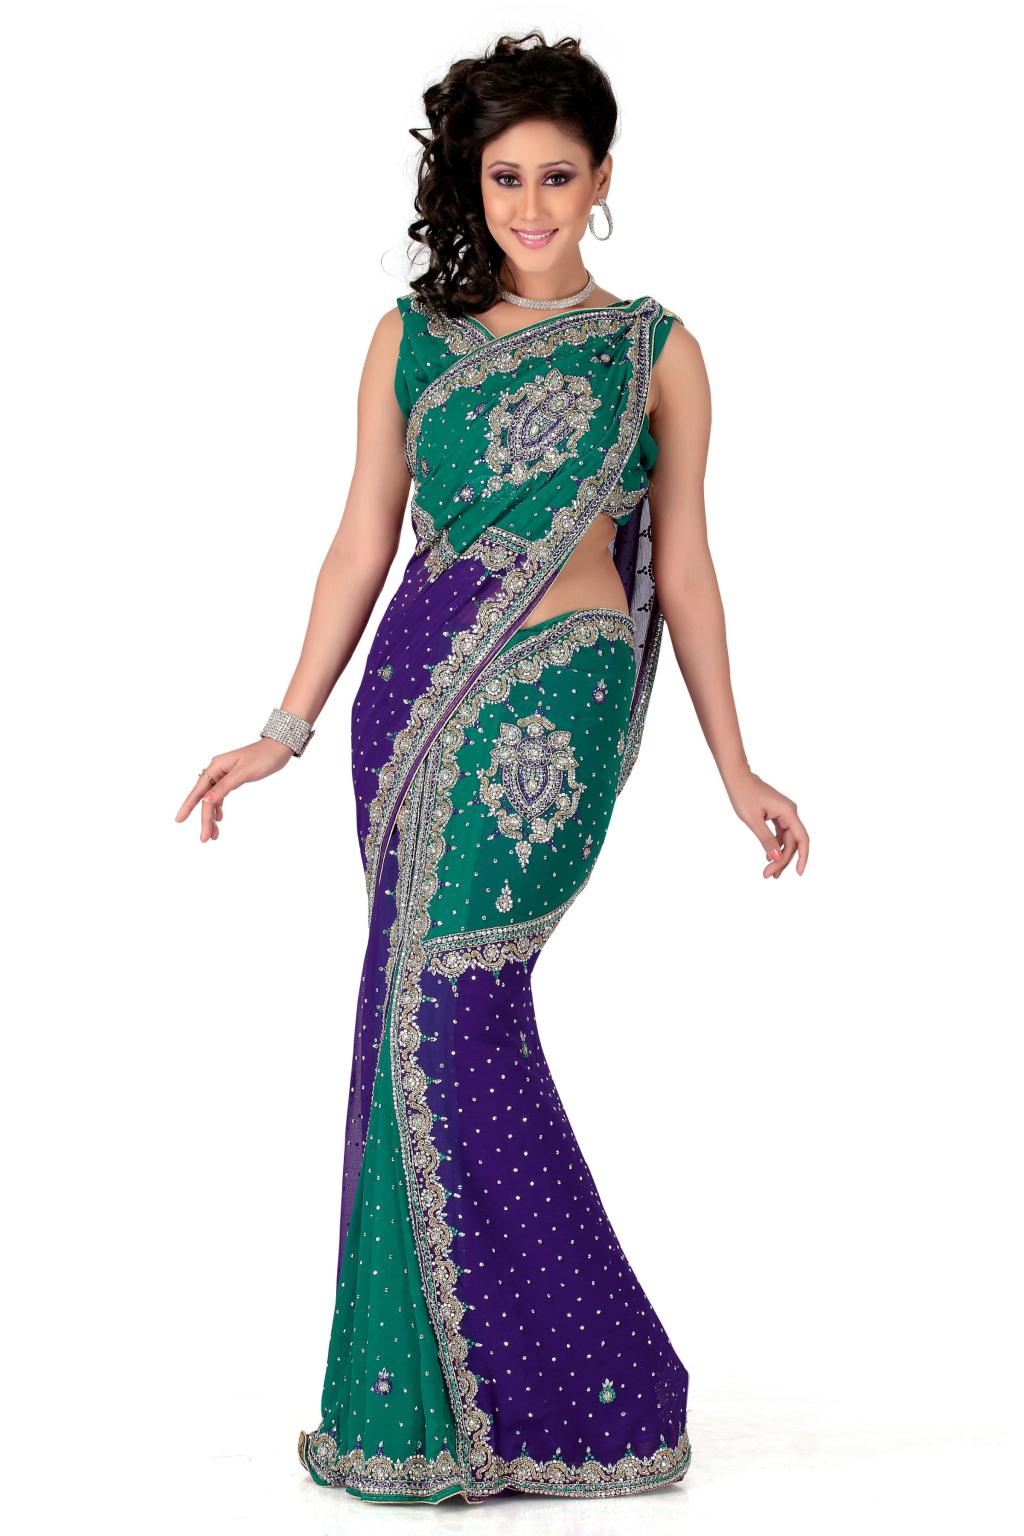 Green and Blue Embroidered with Stone Work Wedding Lehenga Saree 24934